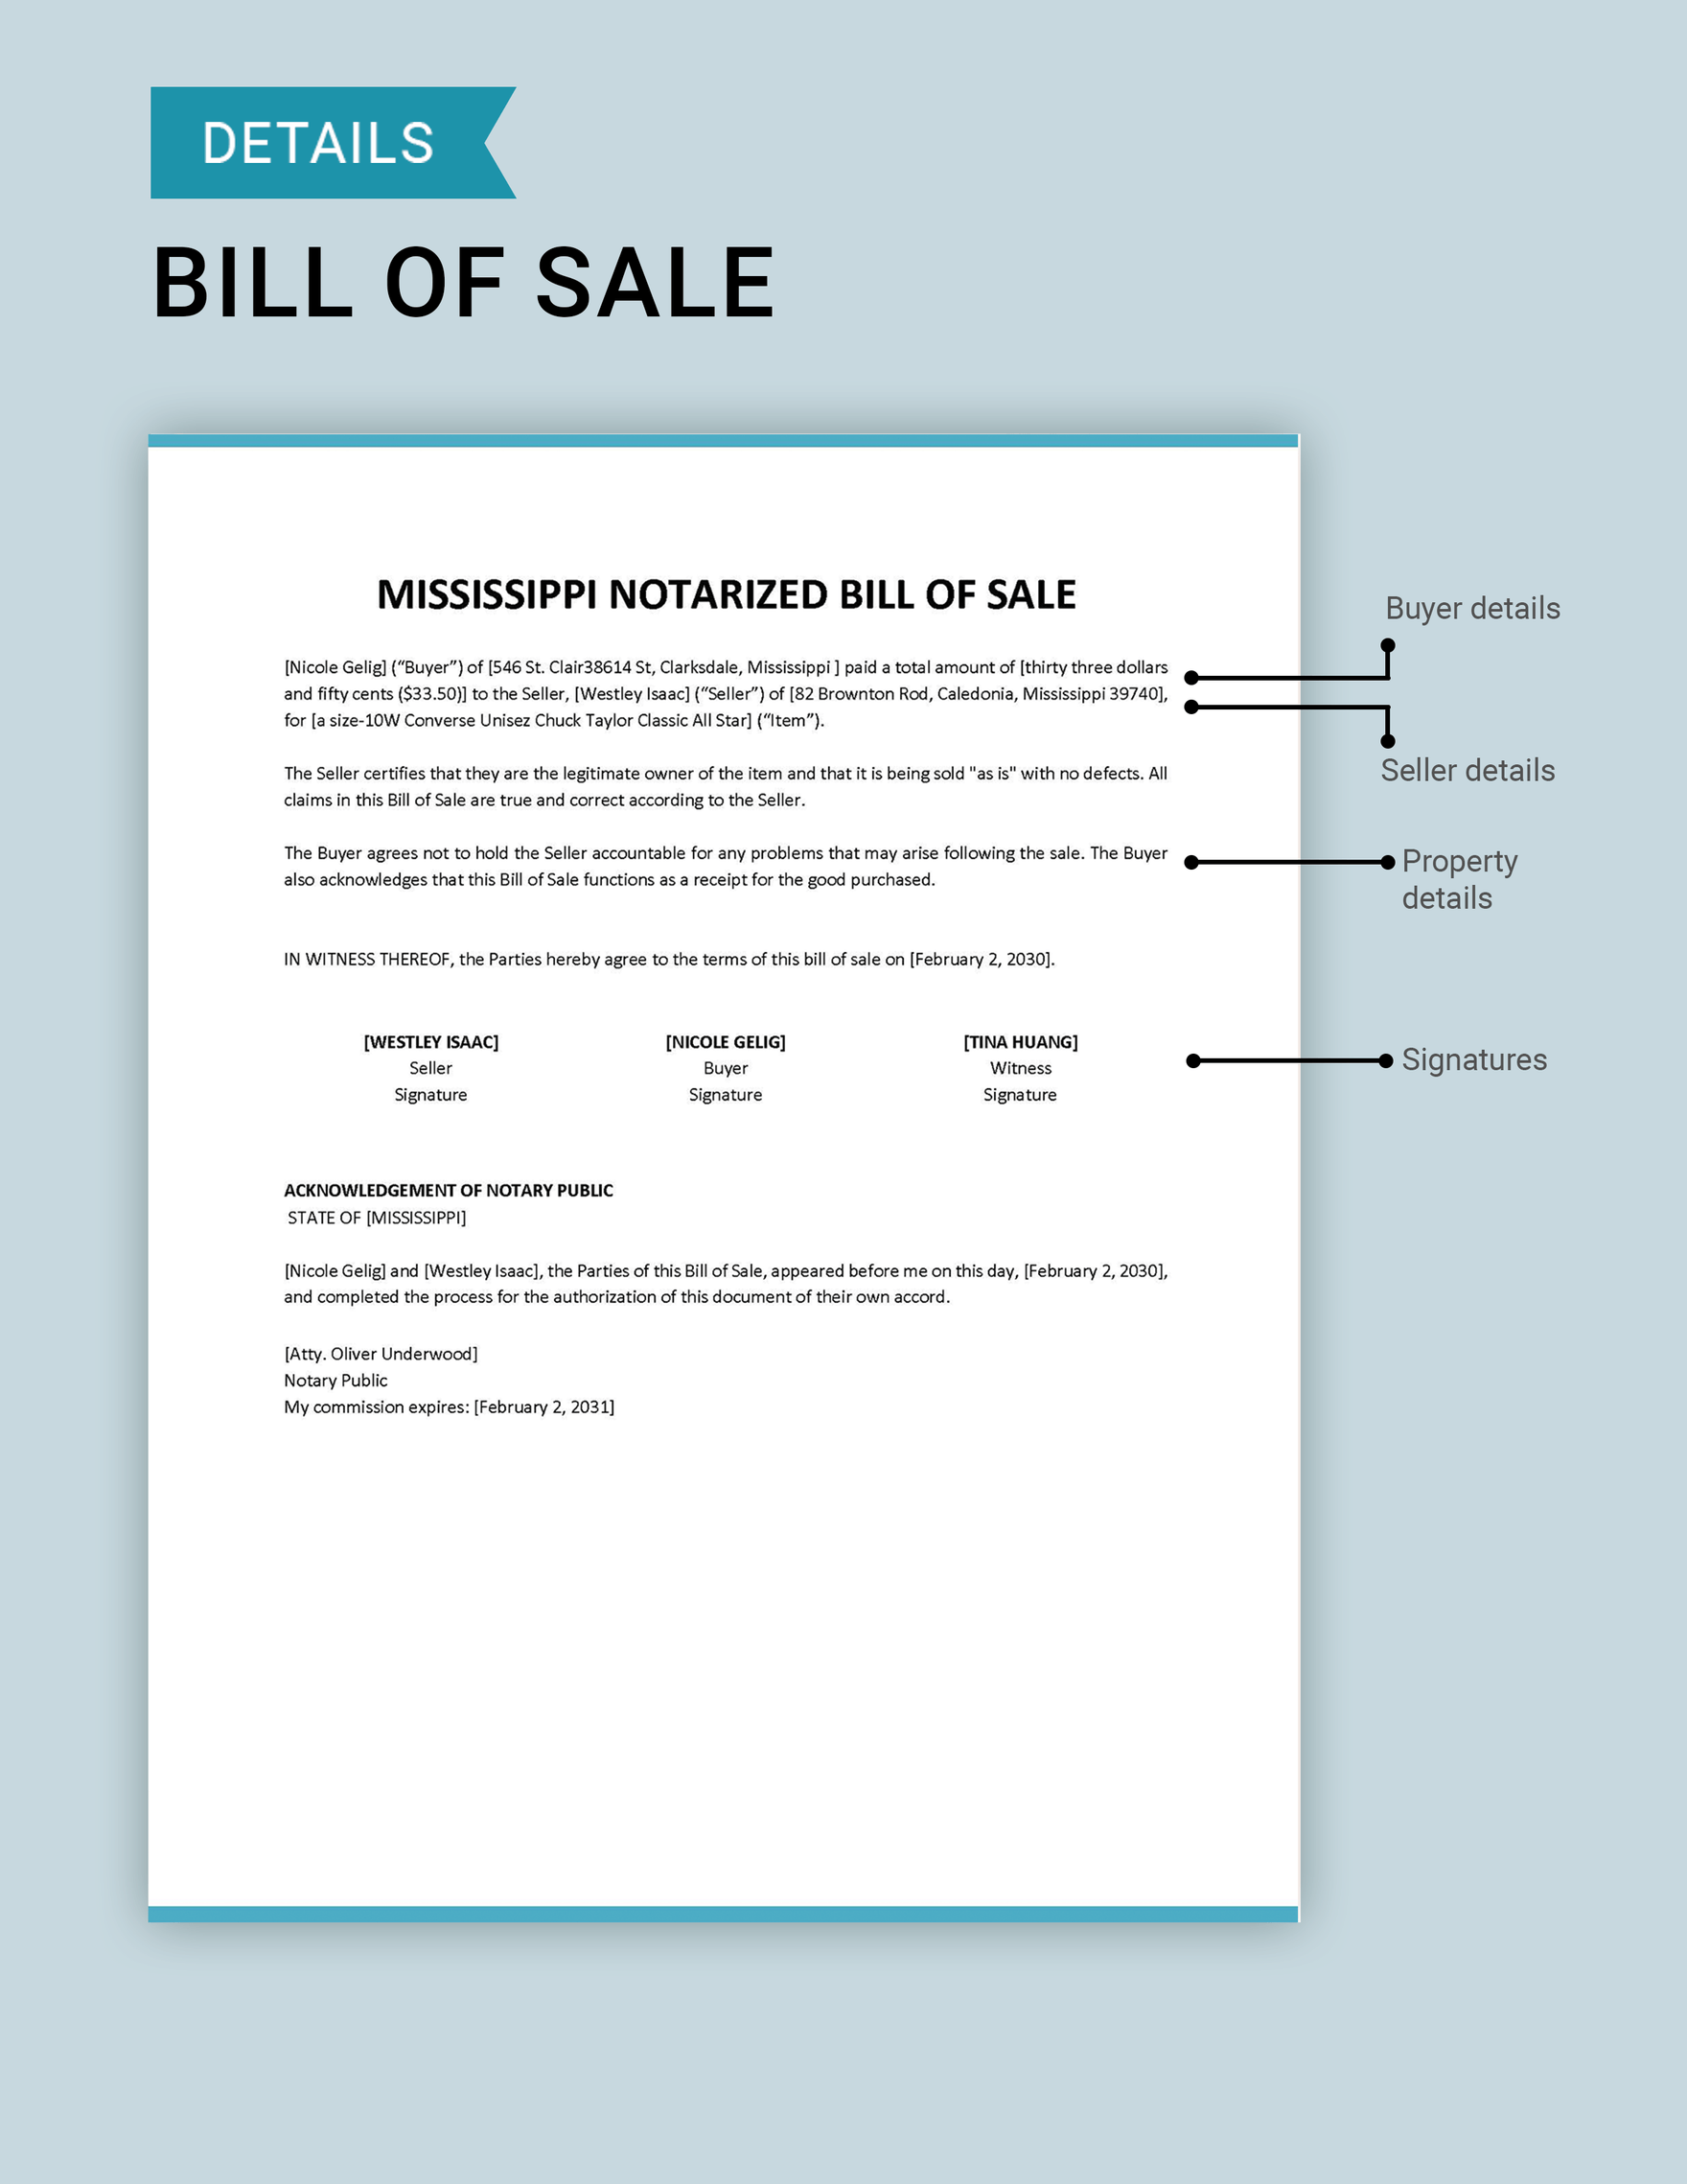 Mississippi Notarized Bill of Sale Template